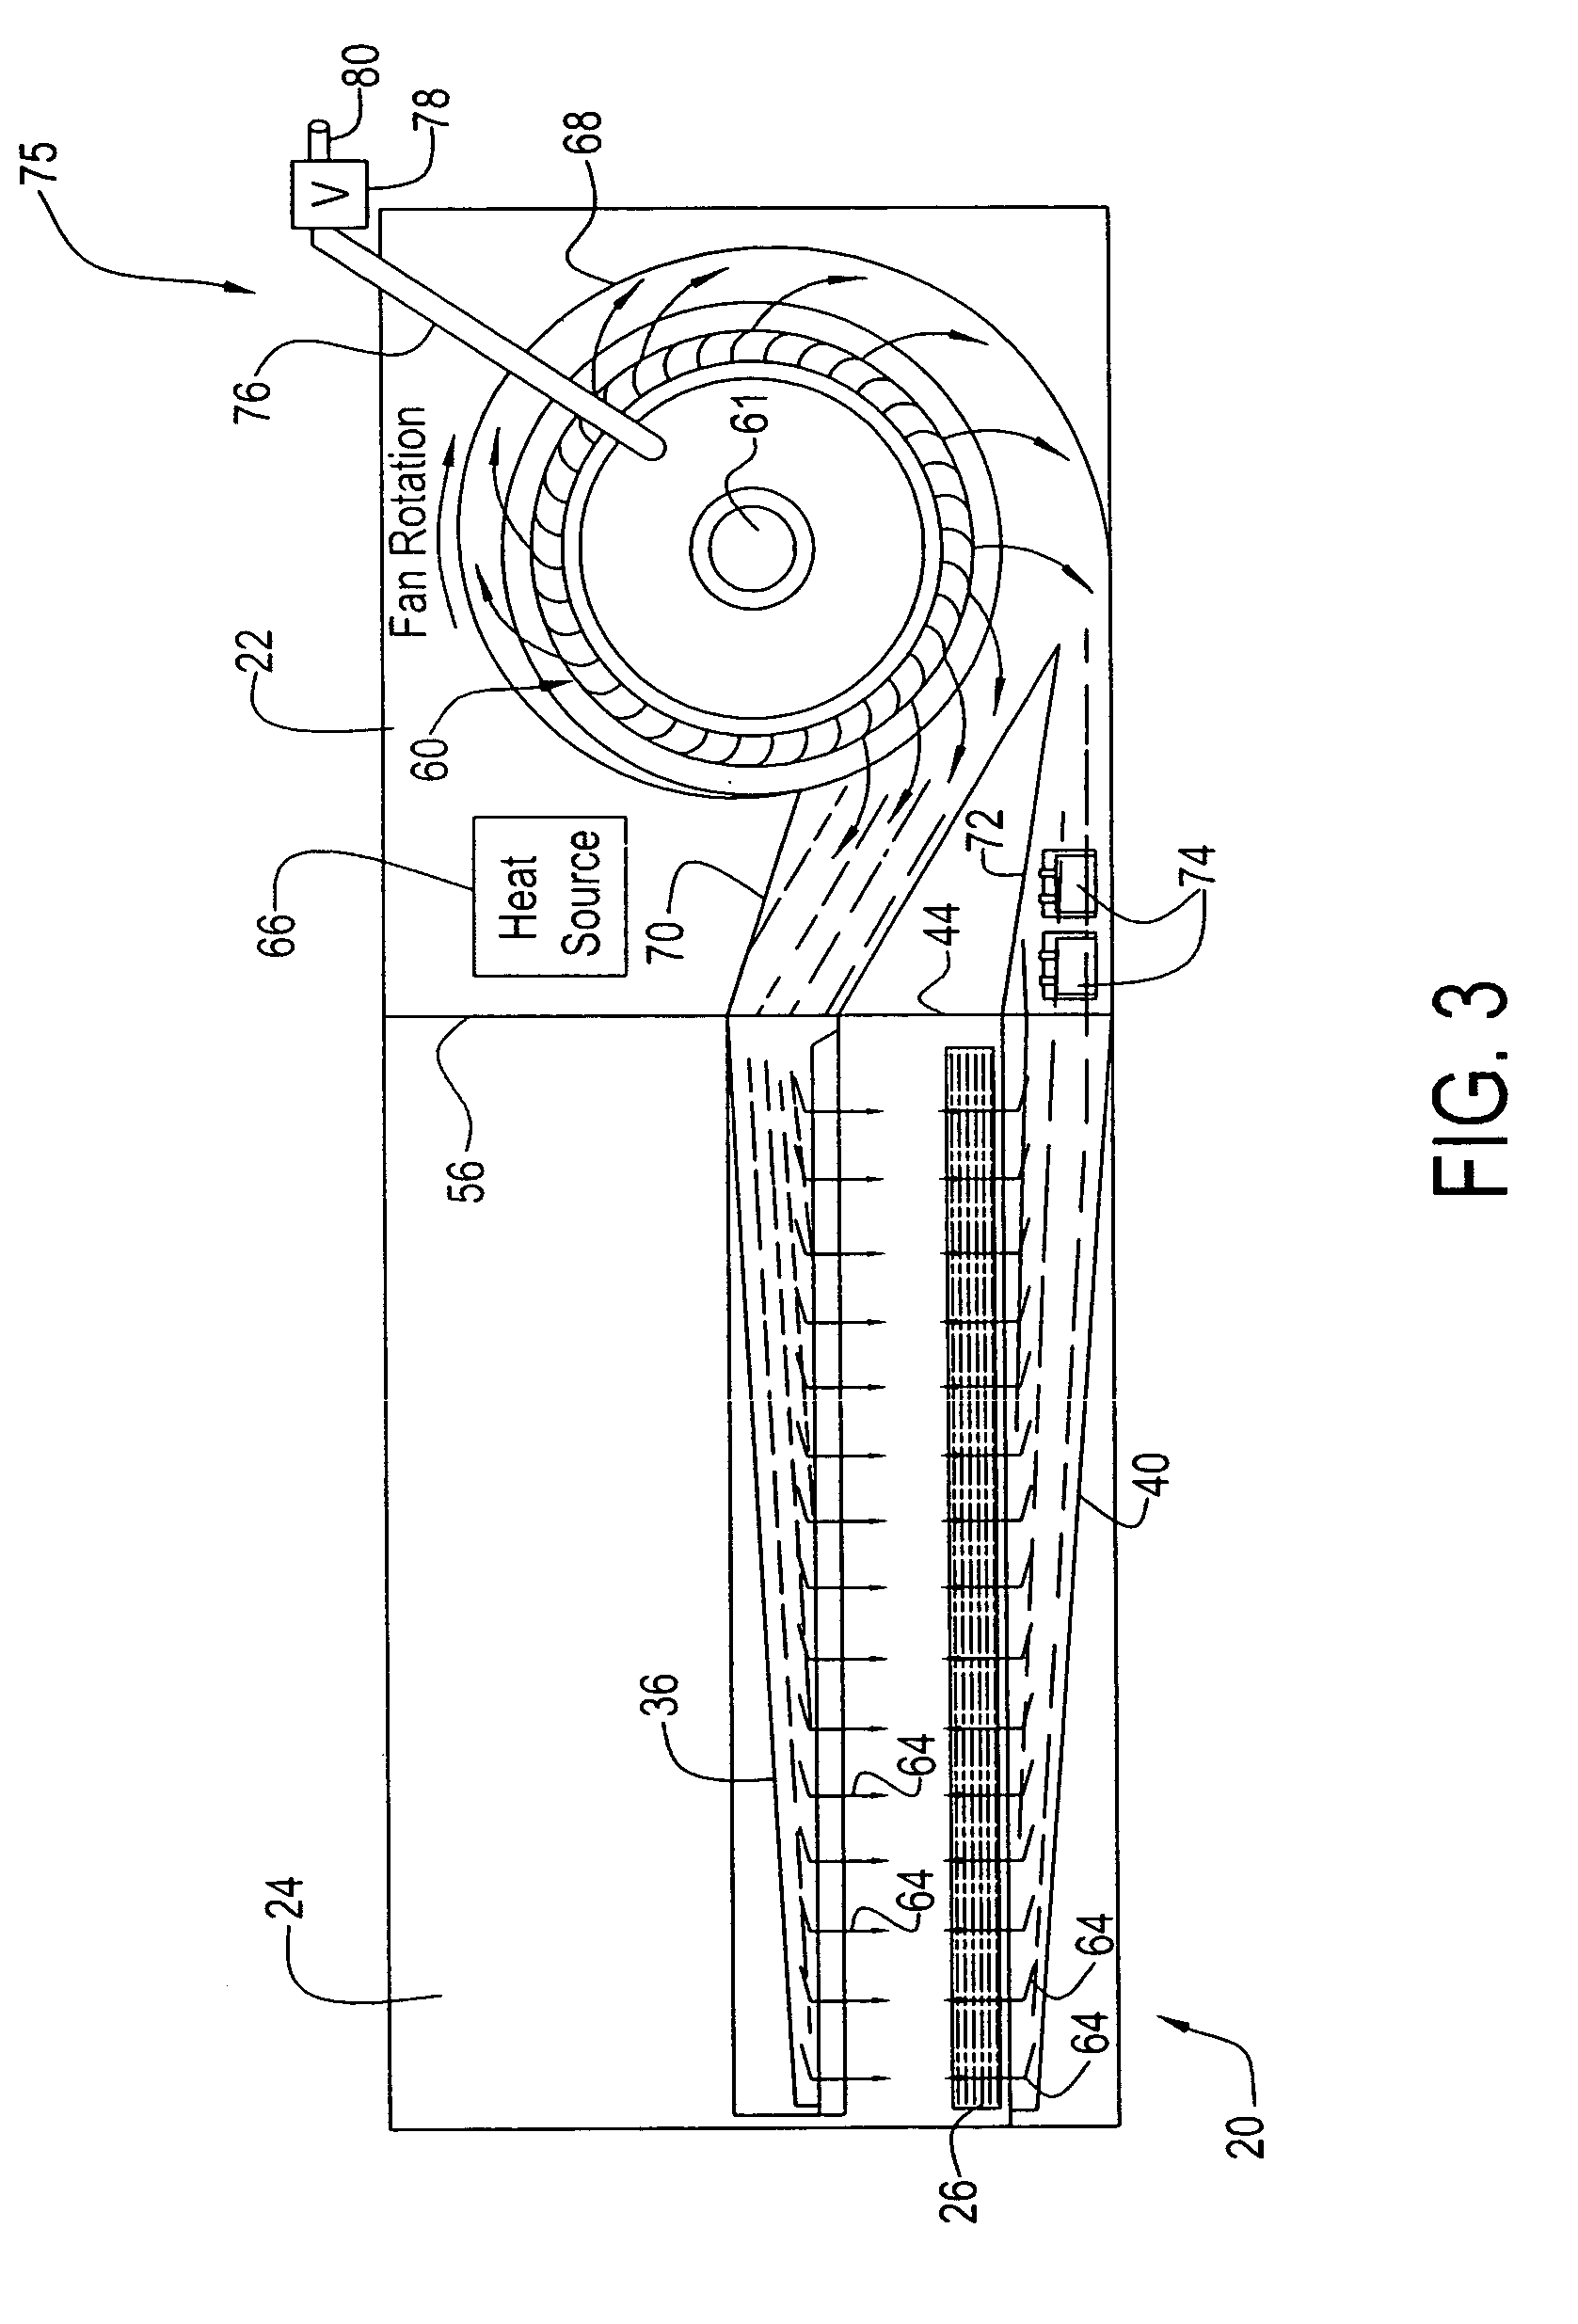 Conveyorized oven with moisture laden air impingement and method